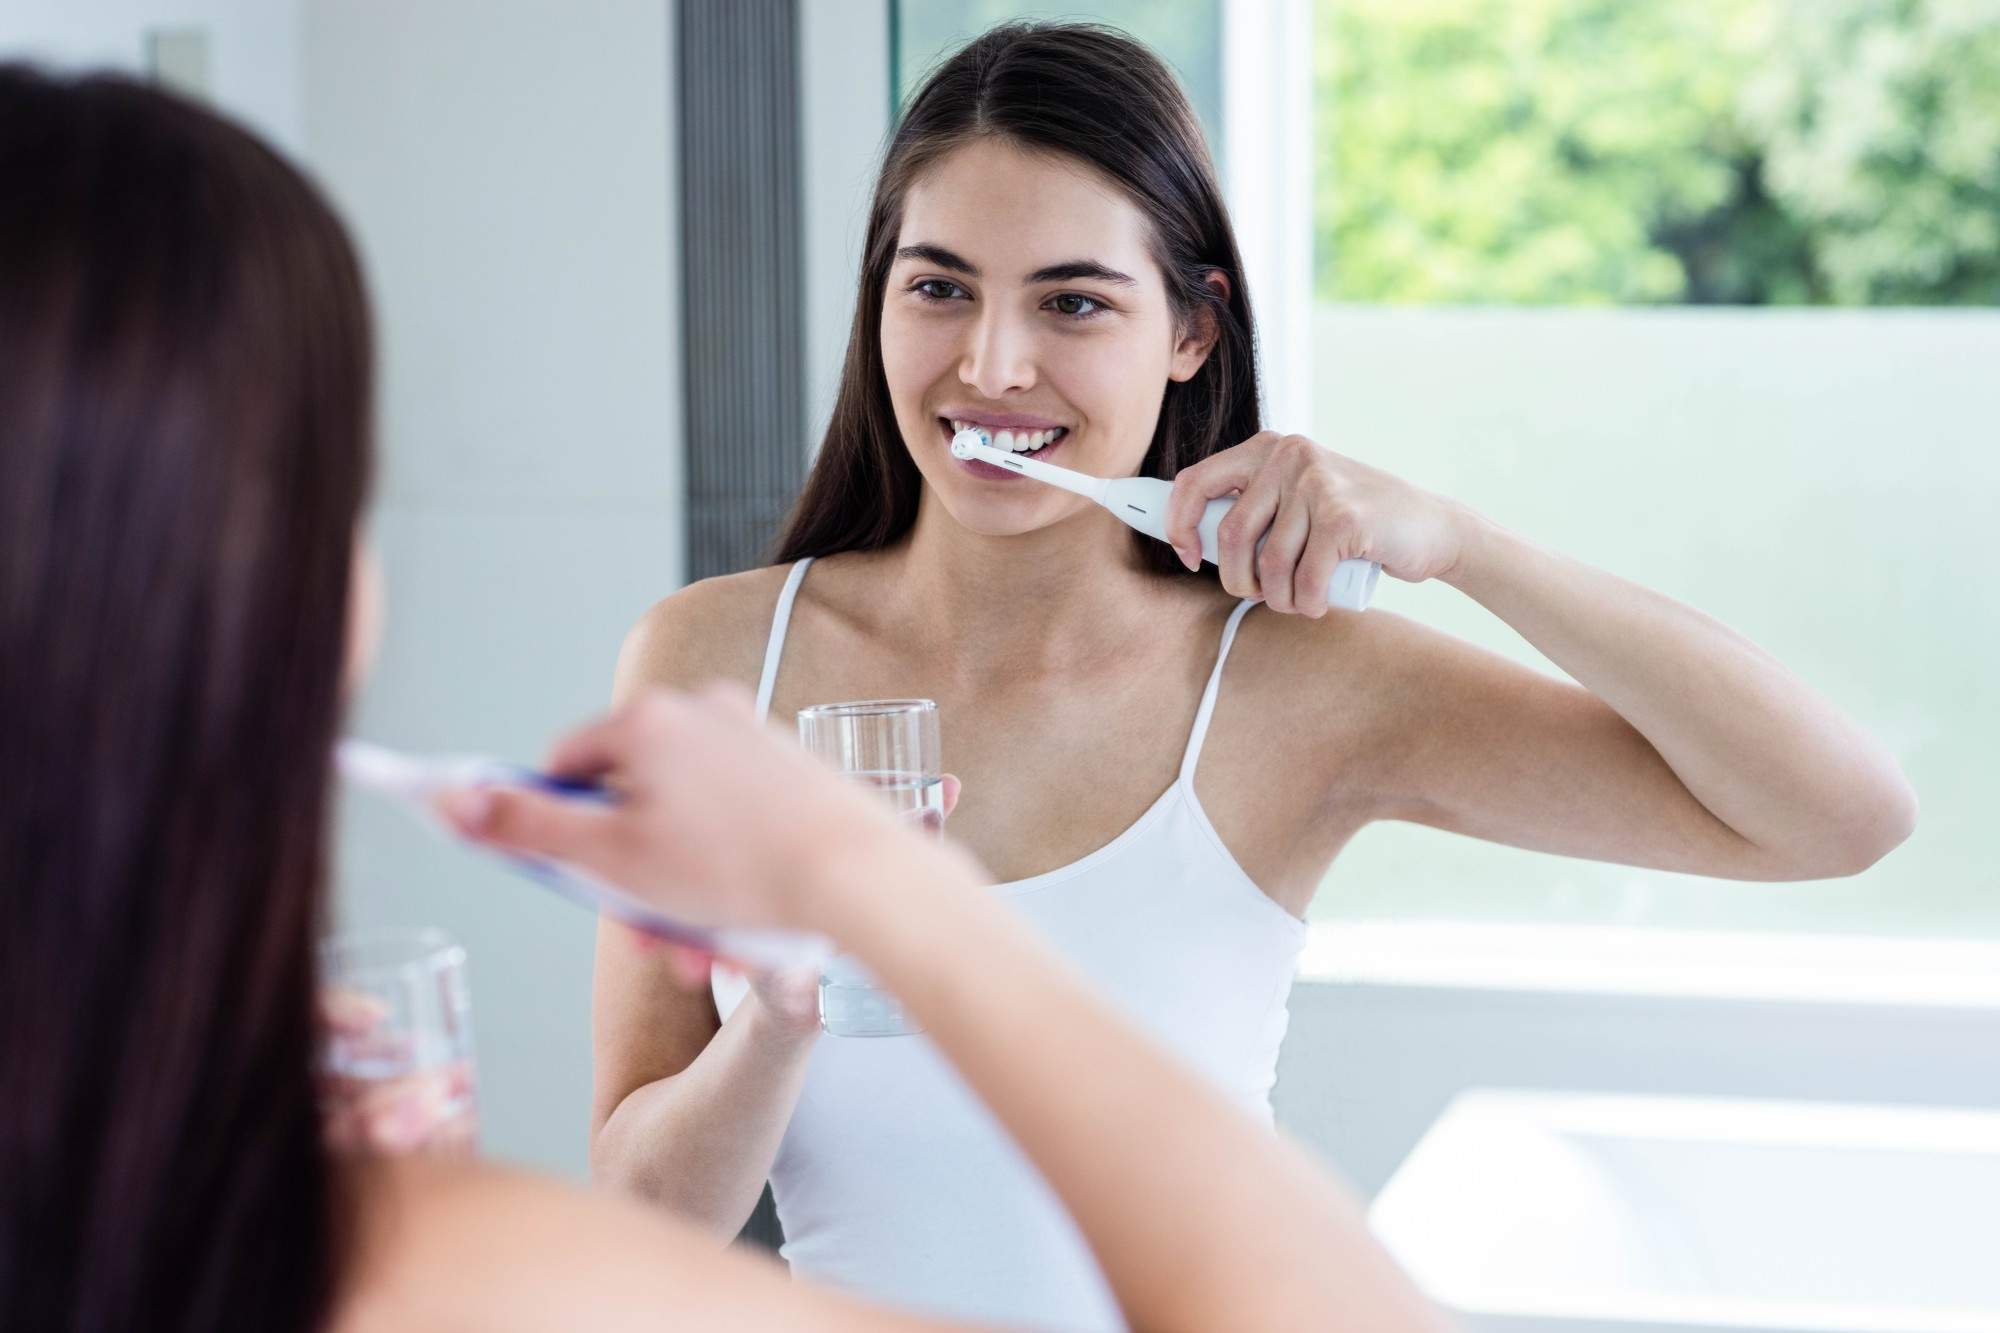 8 Important Dental Care Tips for Teens and Young Adults